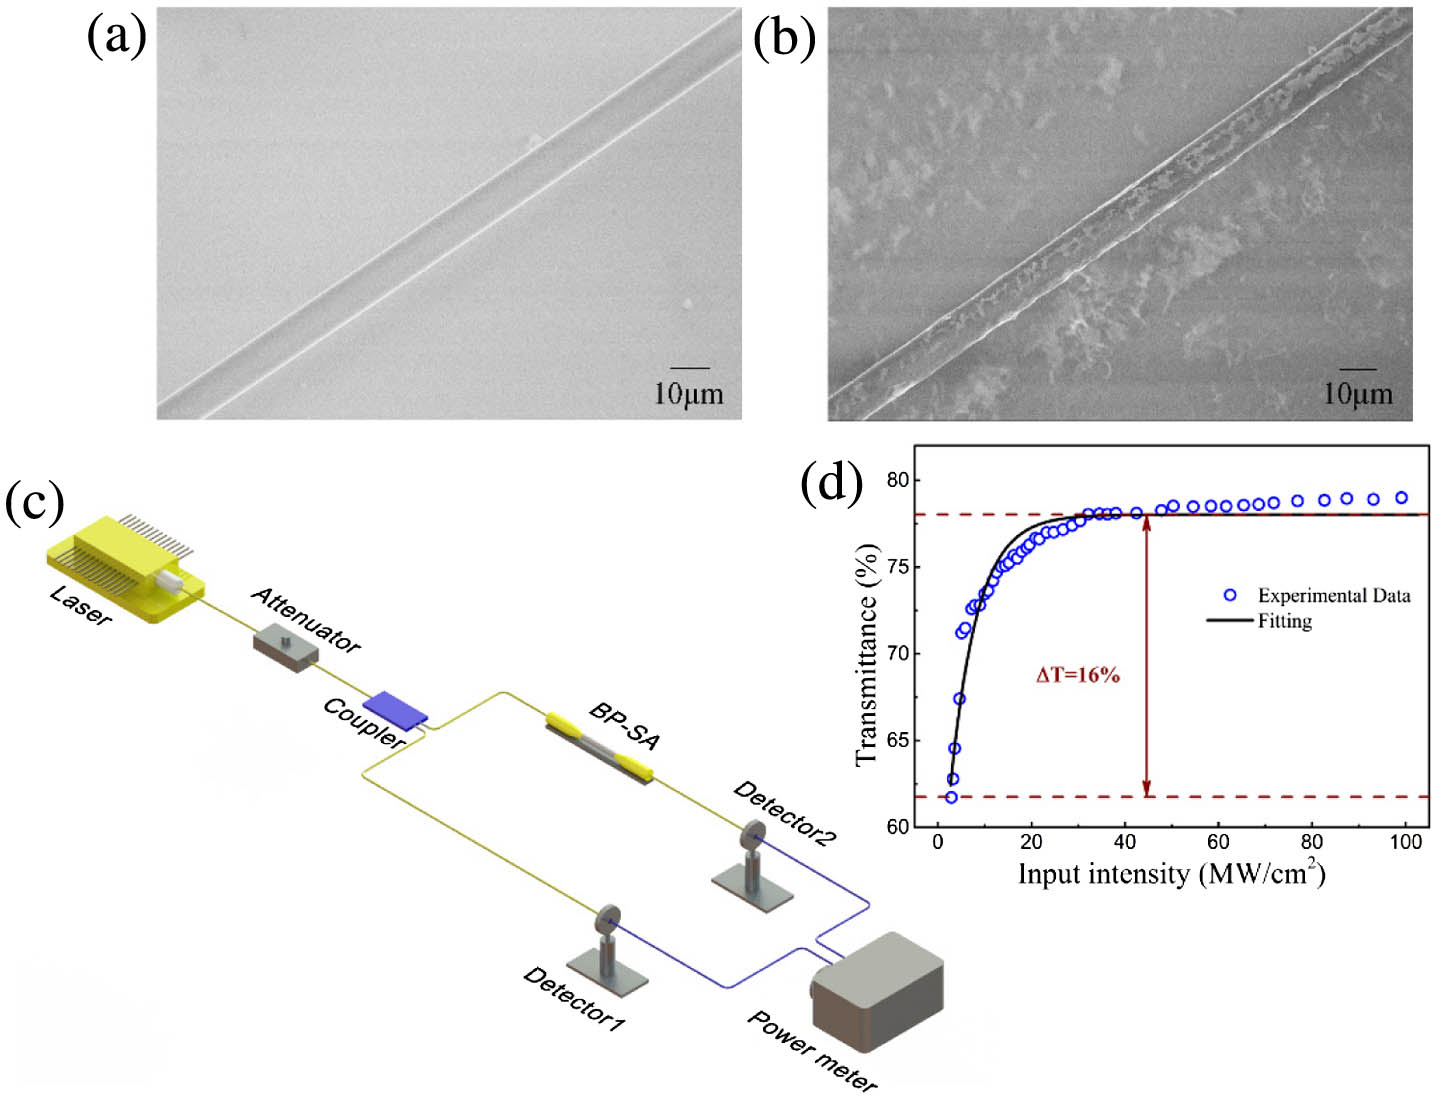 Optical images of (a) bare microfiber and (b) microfiber coated with BP flakes, (c) experimental setup of the balanced twin-detector measurement device, (d) the measured saturable absorption and its corresponding fitting curve.